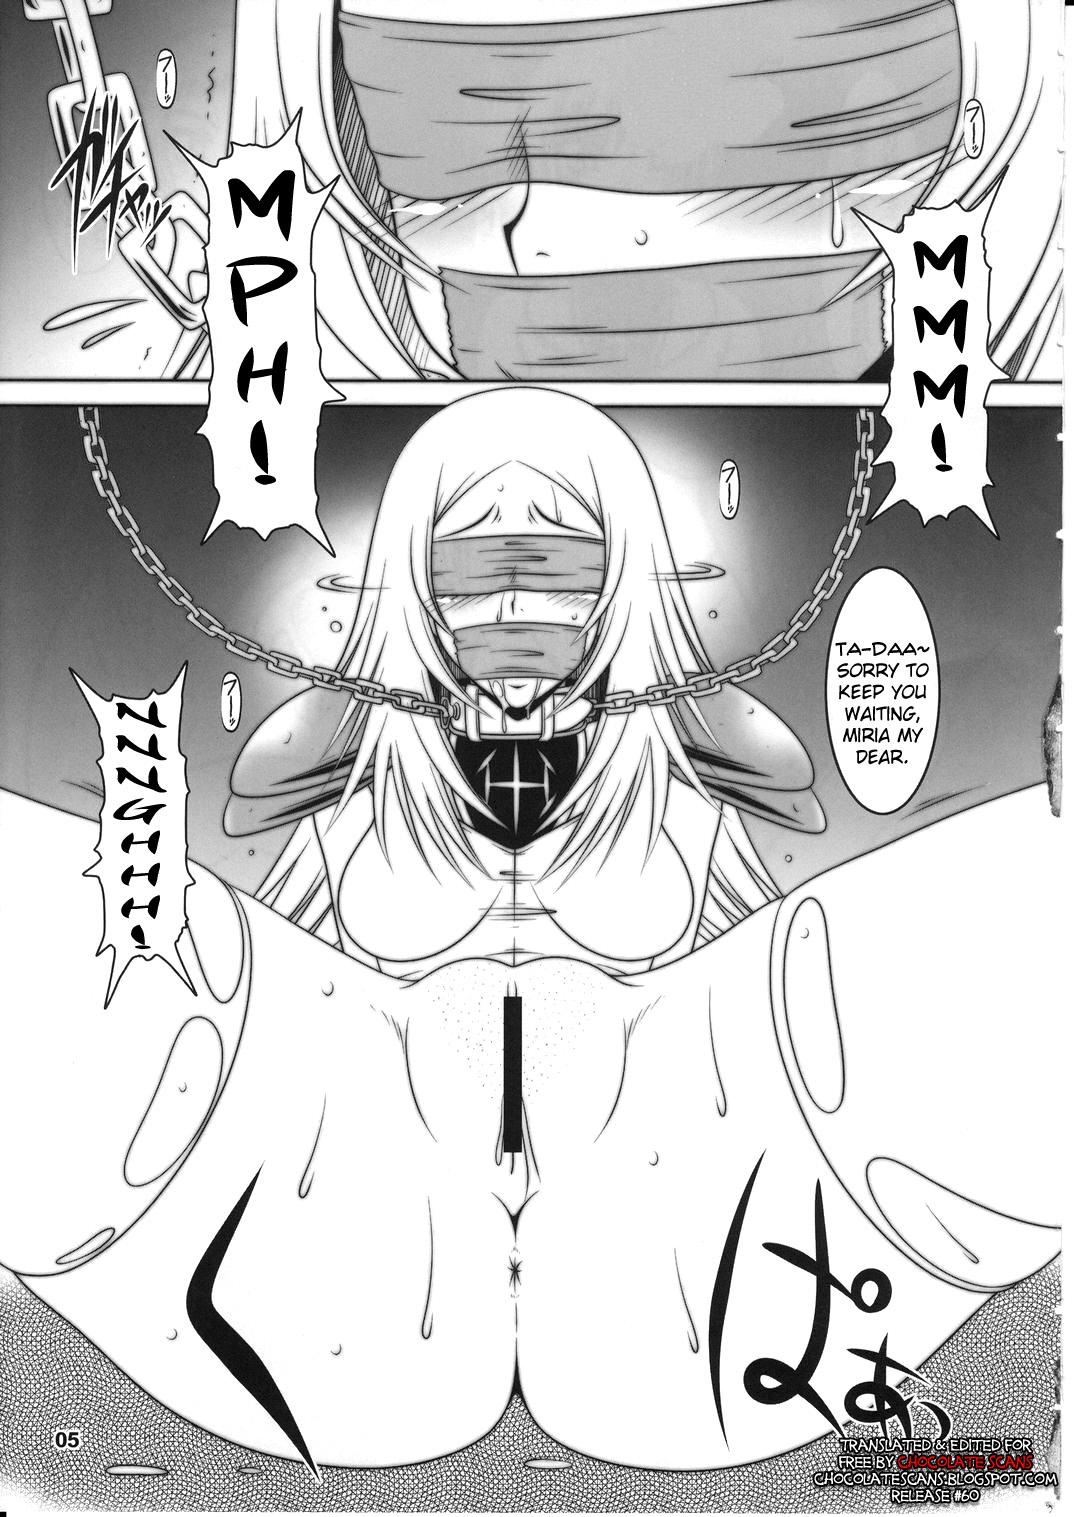 Sex Party Tokimeki Claymore 2 - Claymore Athletic - Page 4